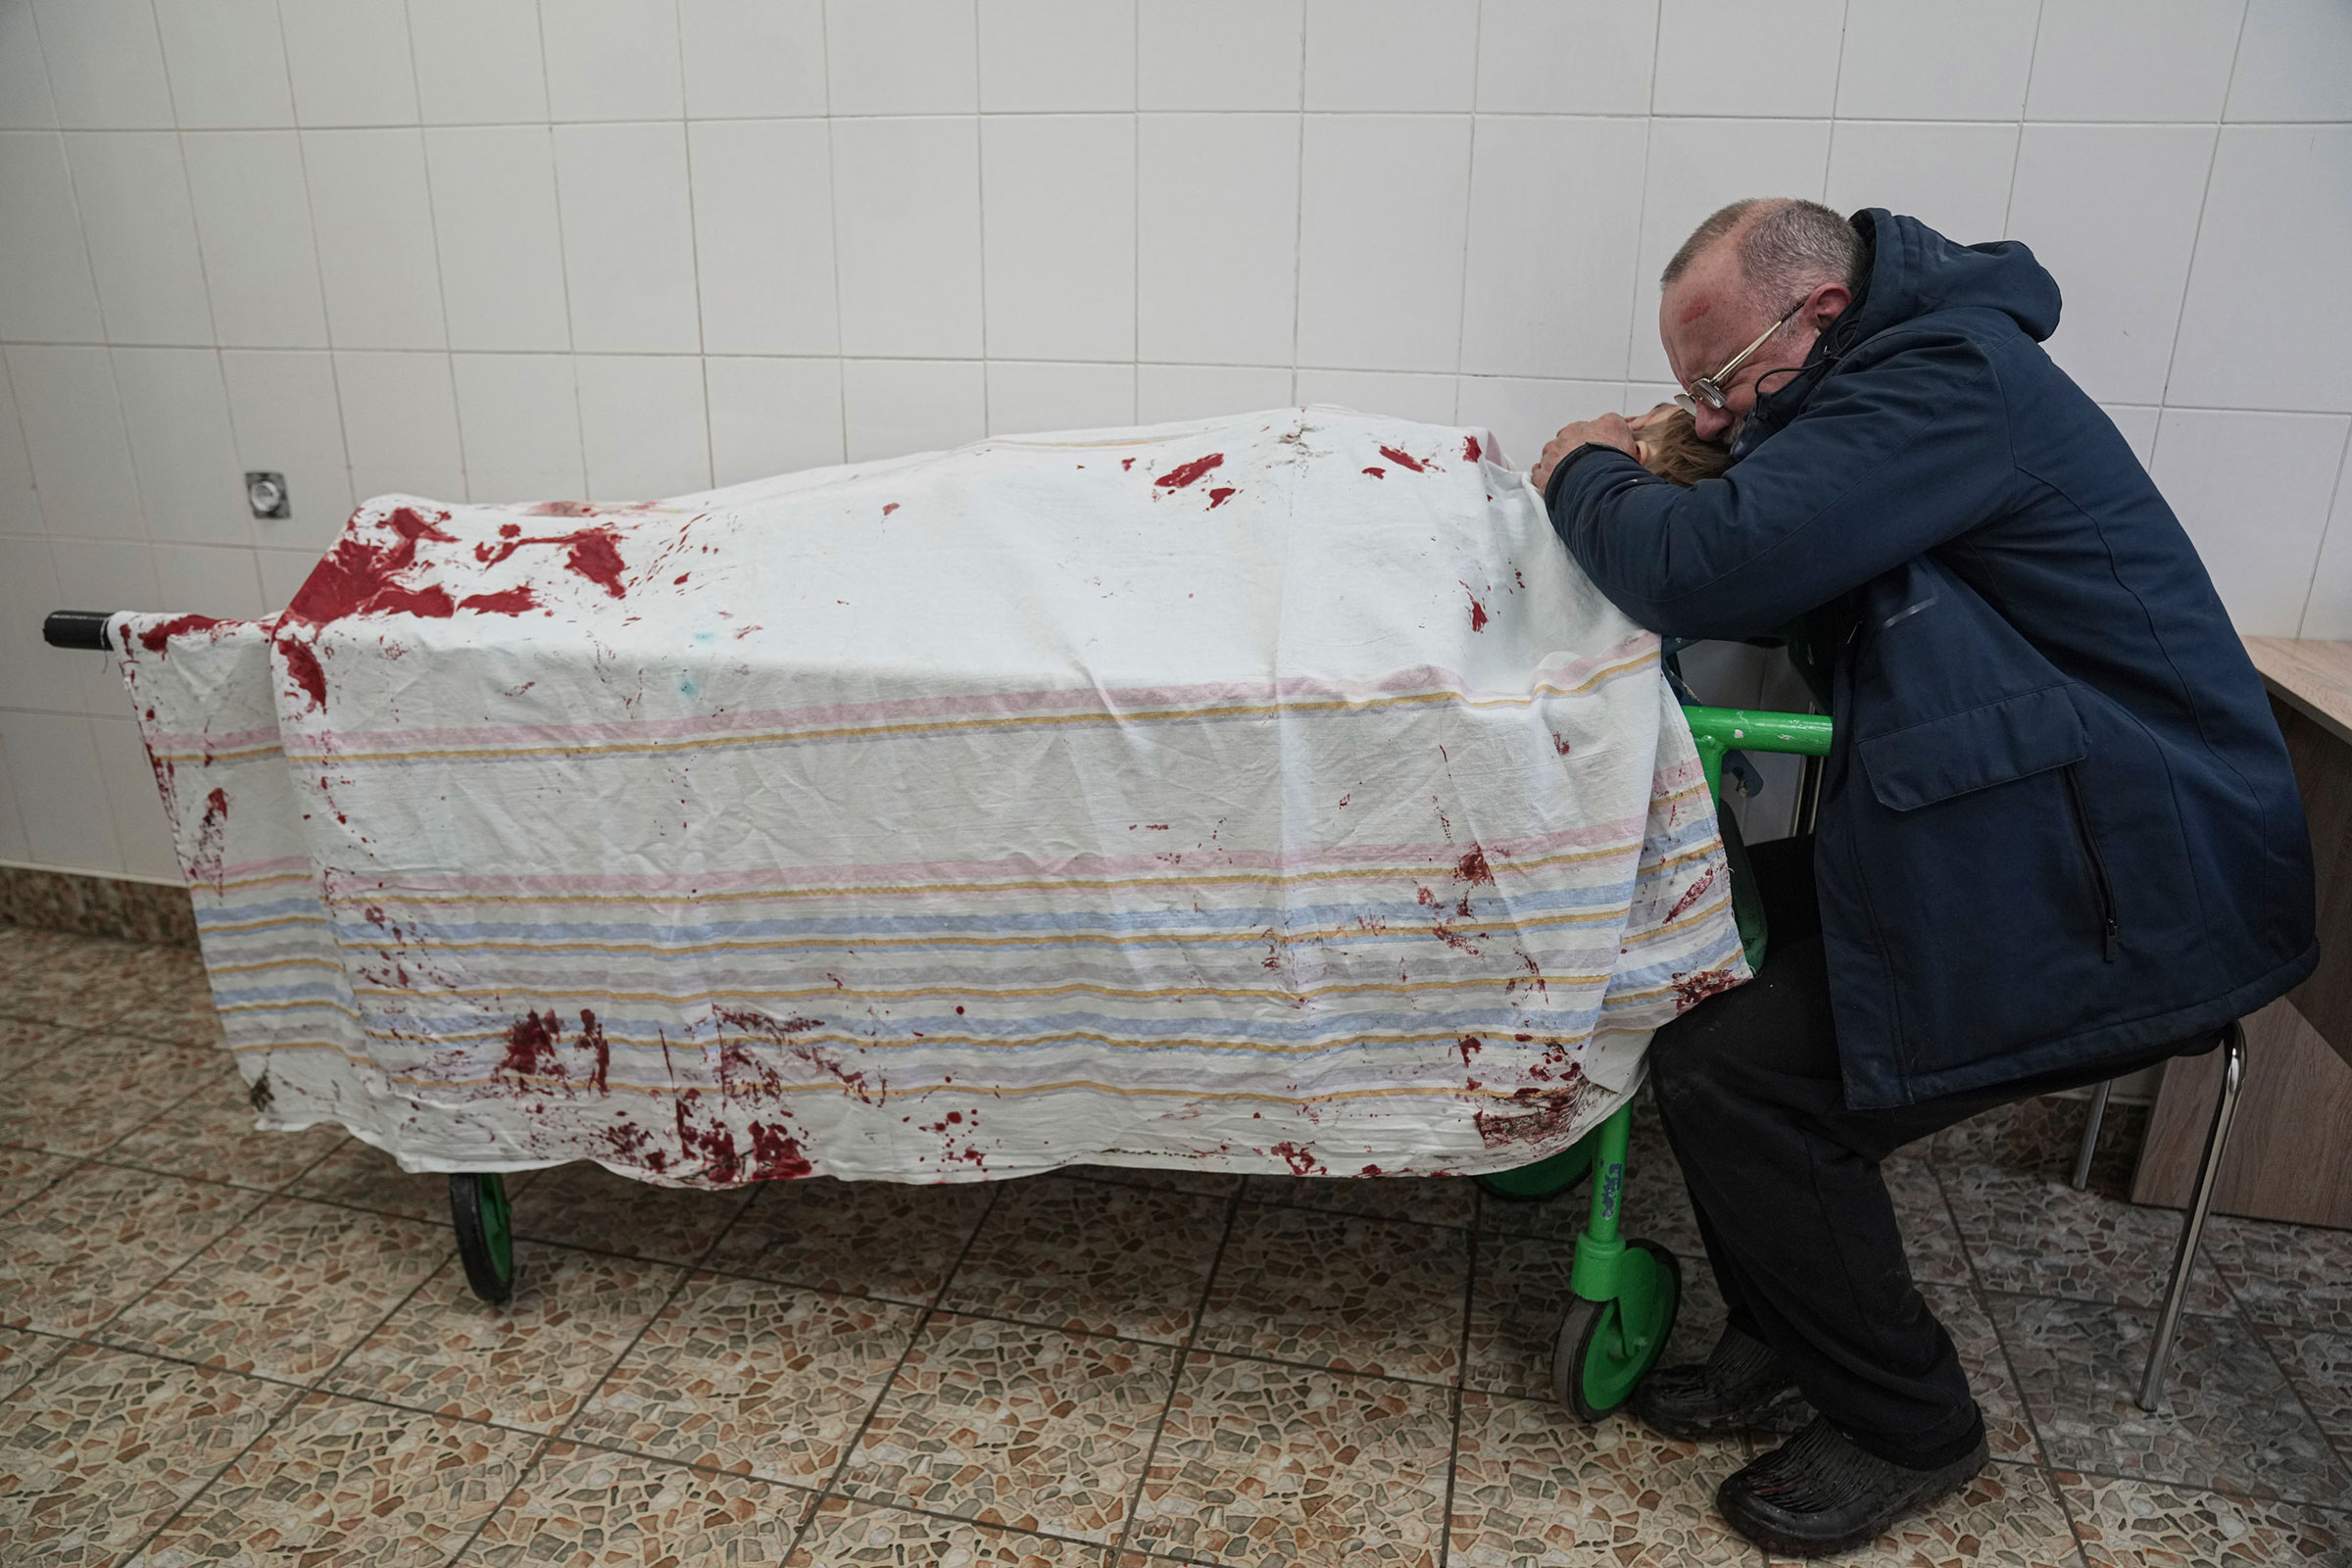 Serhii, father of teenager Iliya, cries on his son's lifeless body lying on a stretcher at a maternity hospital converted into a medical ward in Mariupol on March 2. Iliya was fatally wounded Wednesday while playing soccer in Mariupol when shelling started amid the Russian invasion of Ukraine. The explosive hit the soccer field near a school in the Azov Sea city. (Evgeniy Maloletka—AP)